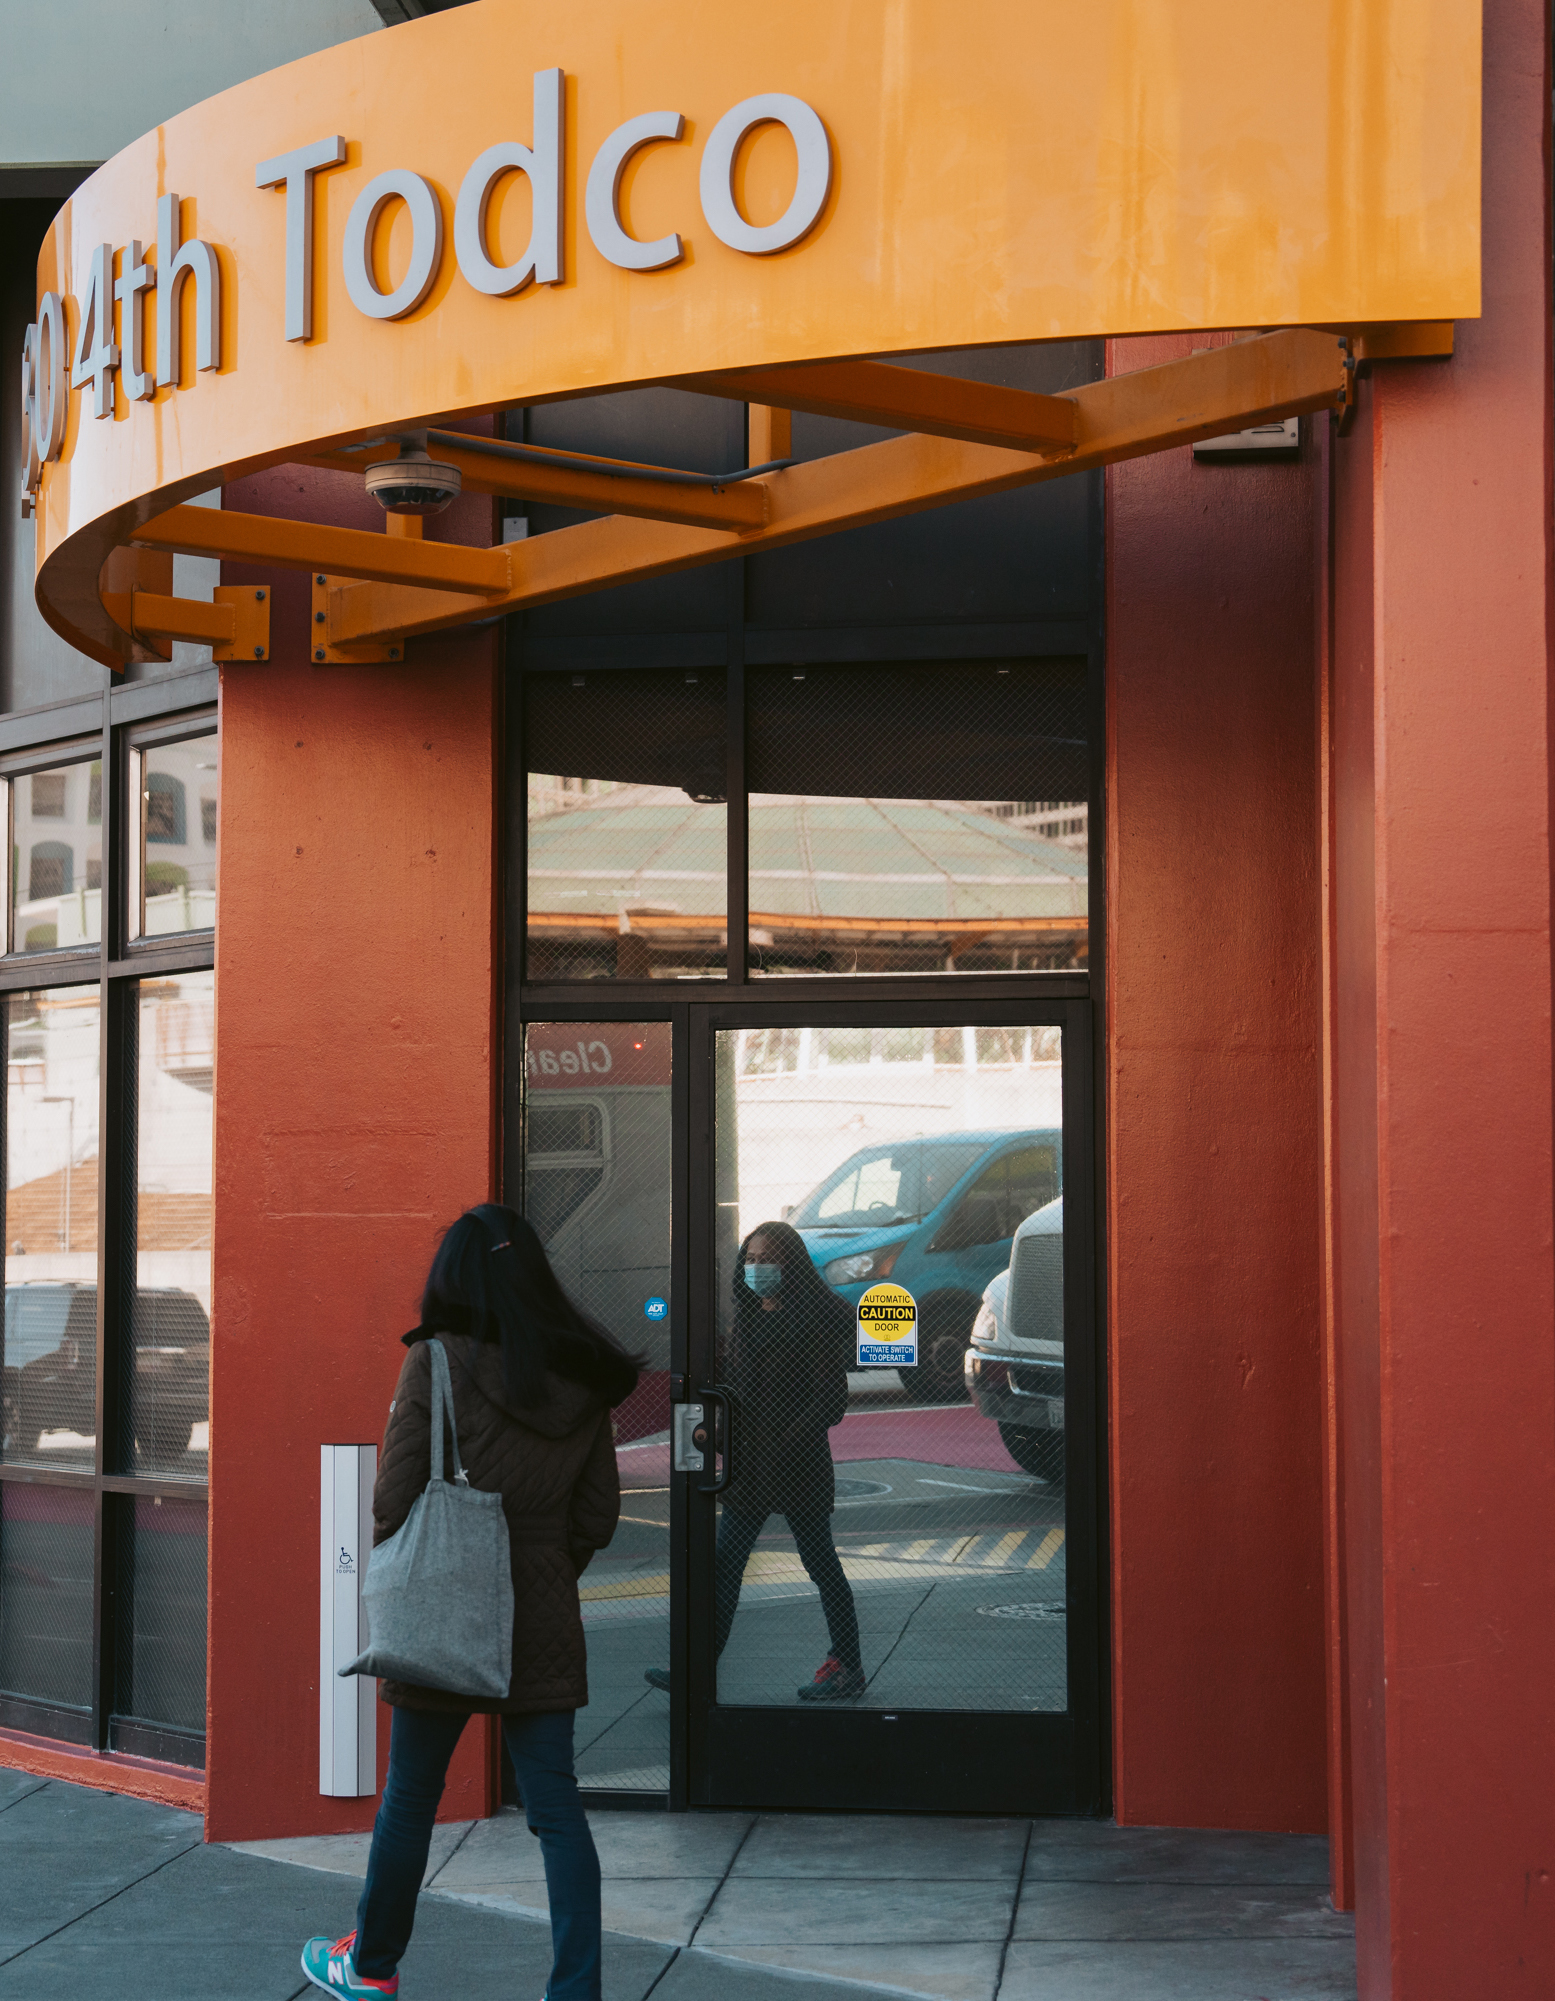 A person walks by a building entrance with a &quot;TODCO&quot; sign above the door.